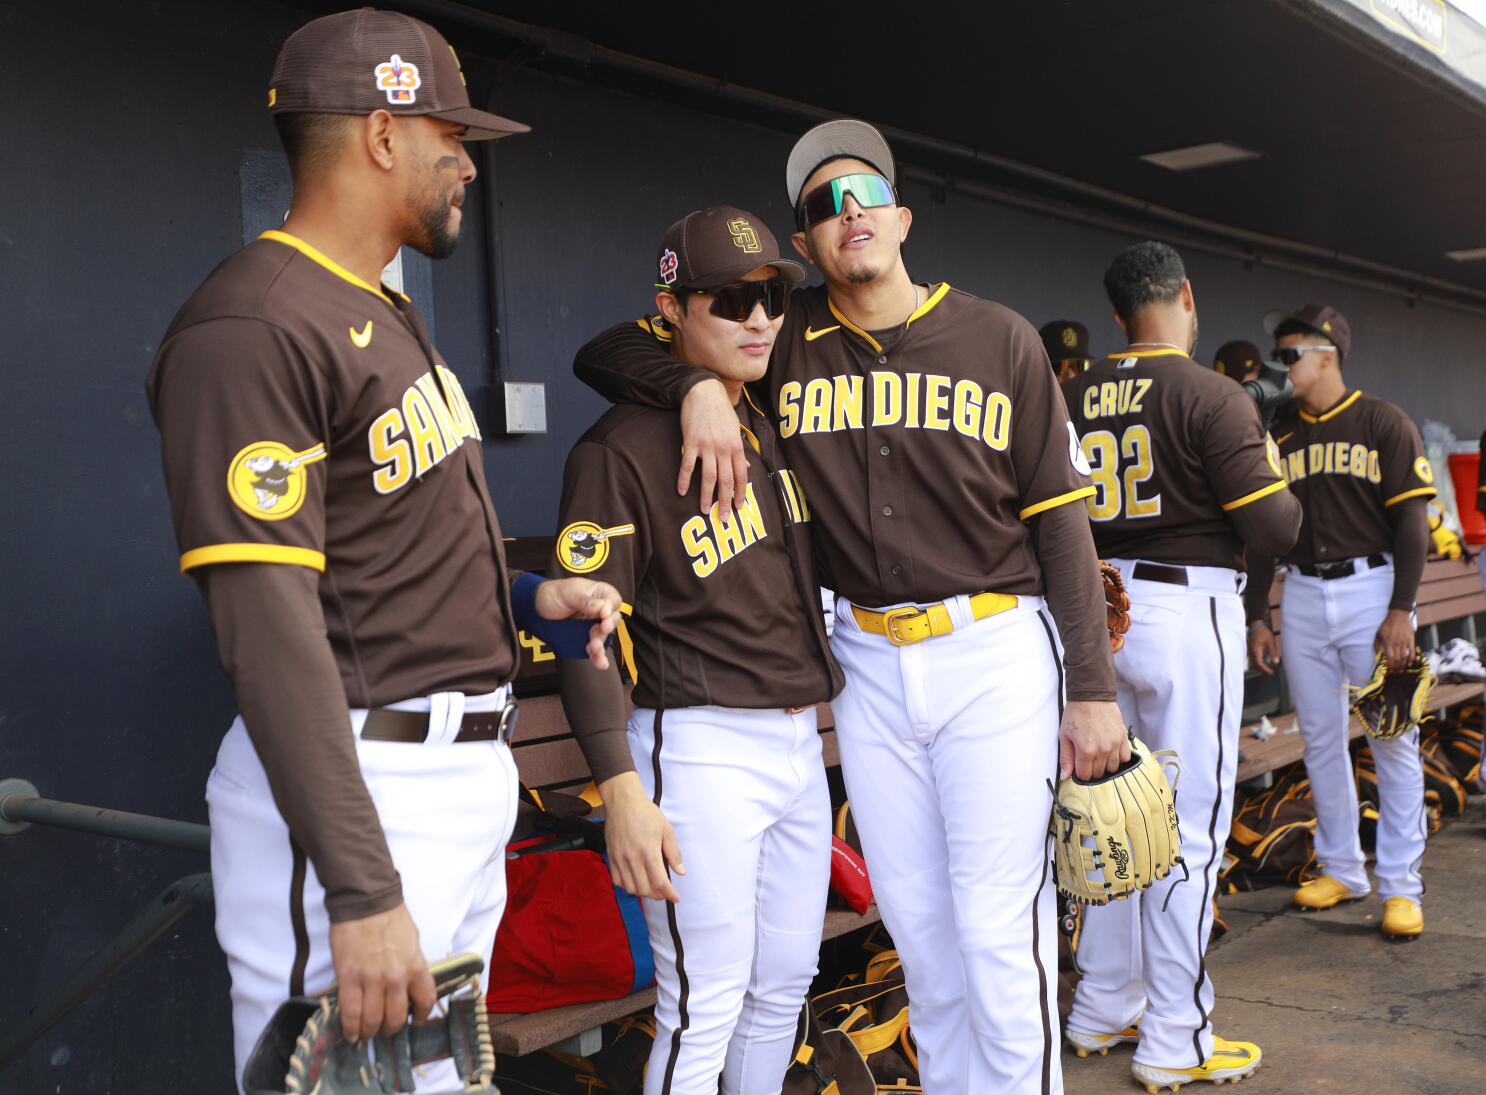 San Diego Padres City Connect Uniforms - Baseball Together Podcast